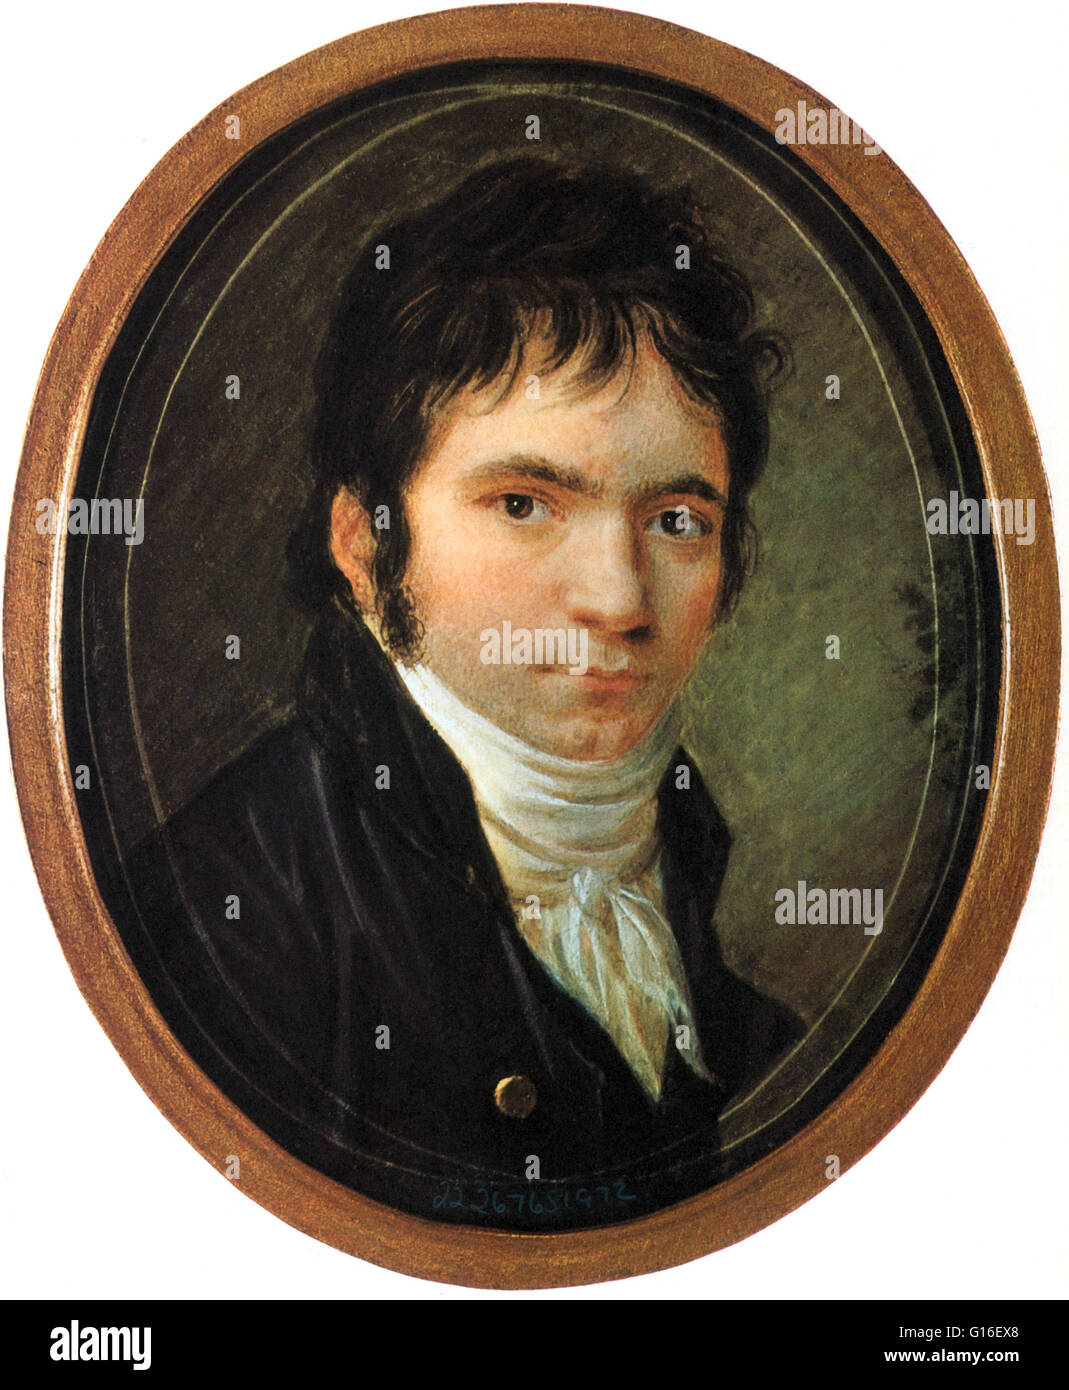 1802 miniature painted on ivory by Hornemann Beethoven-Haus. Beethoven gave this picture to Stephan von Breuning in 1804 as a sign of reconciliation. 'Behind this painting, my good, dear St., let us hide for ever what has divided us for a time.' Beethoven Stock Photo